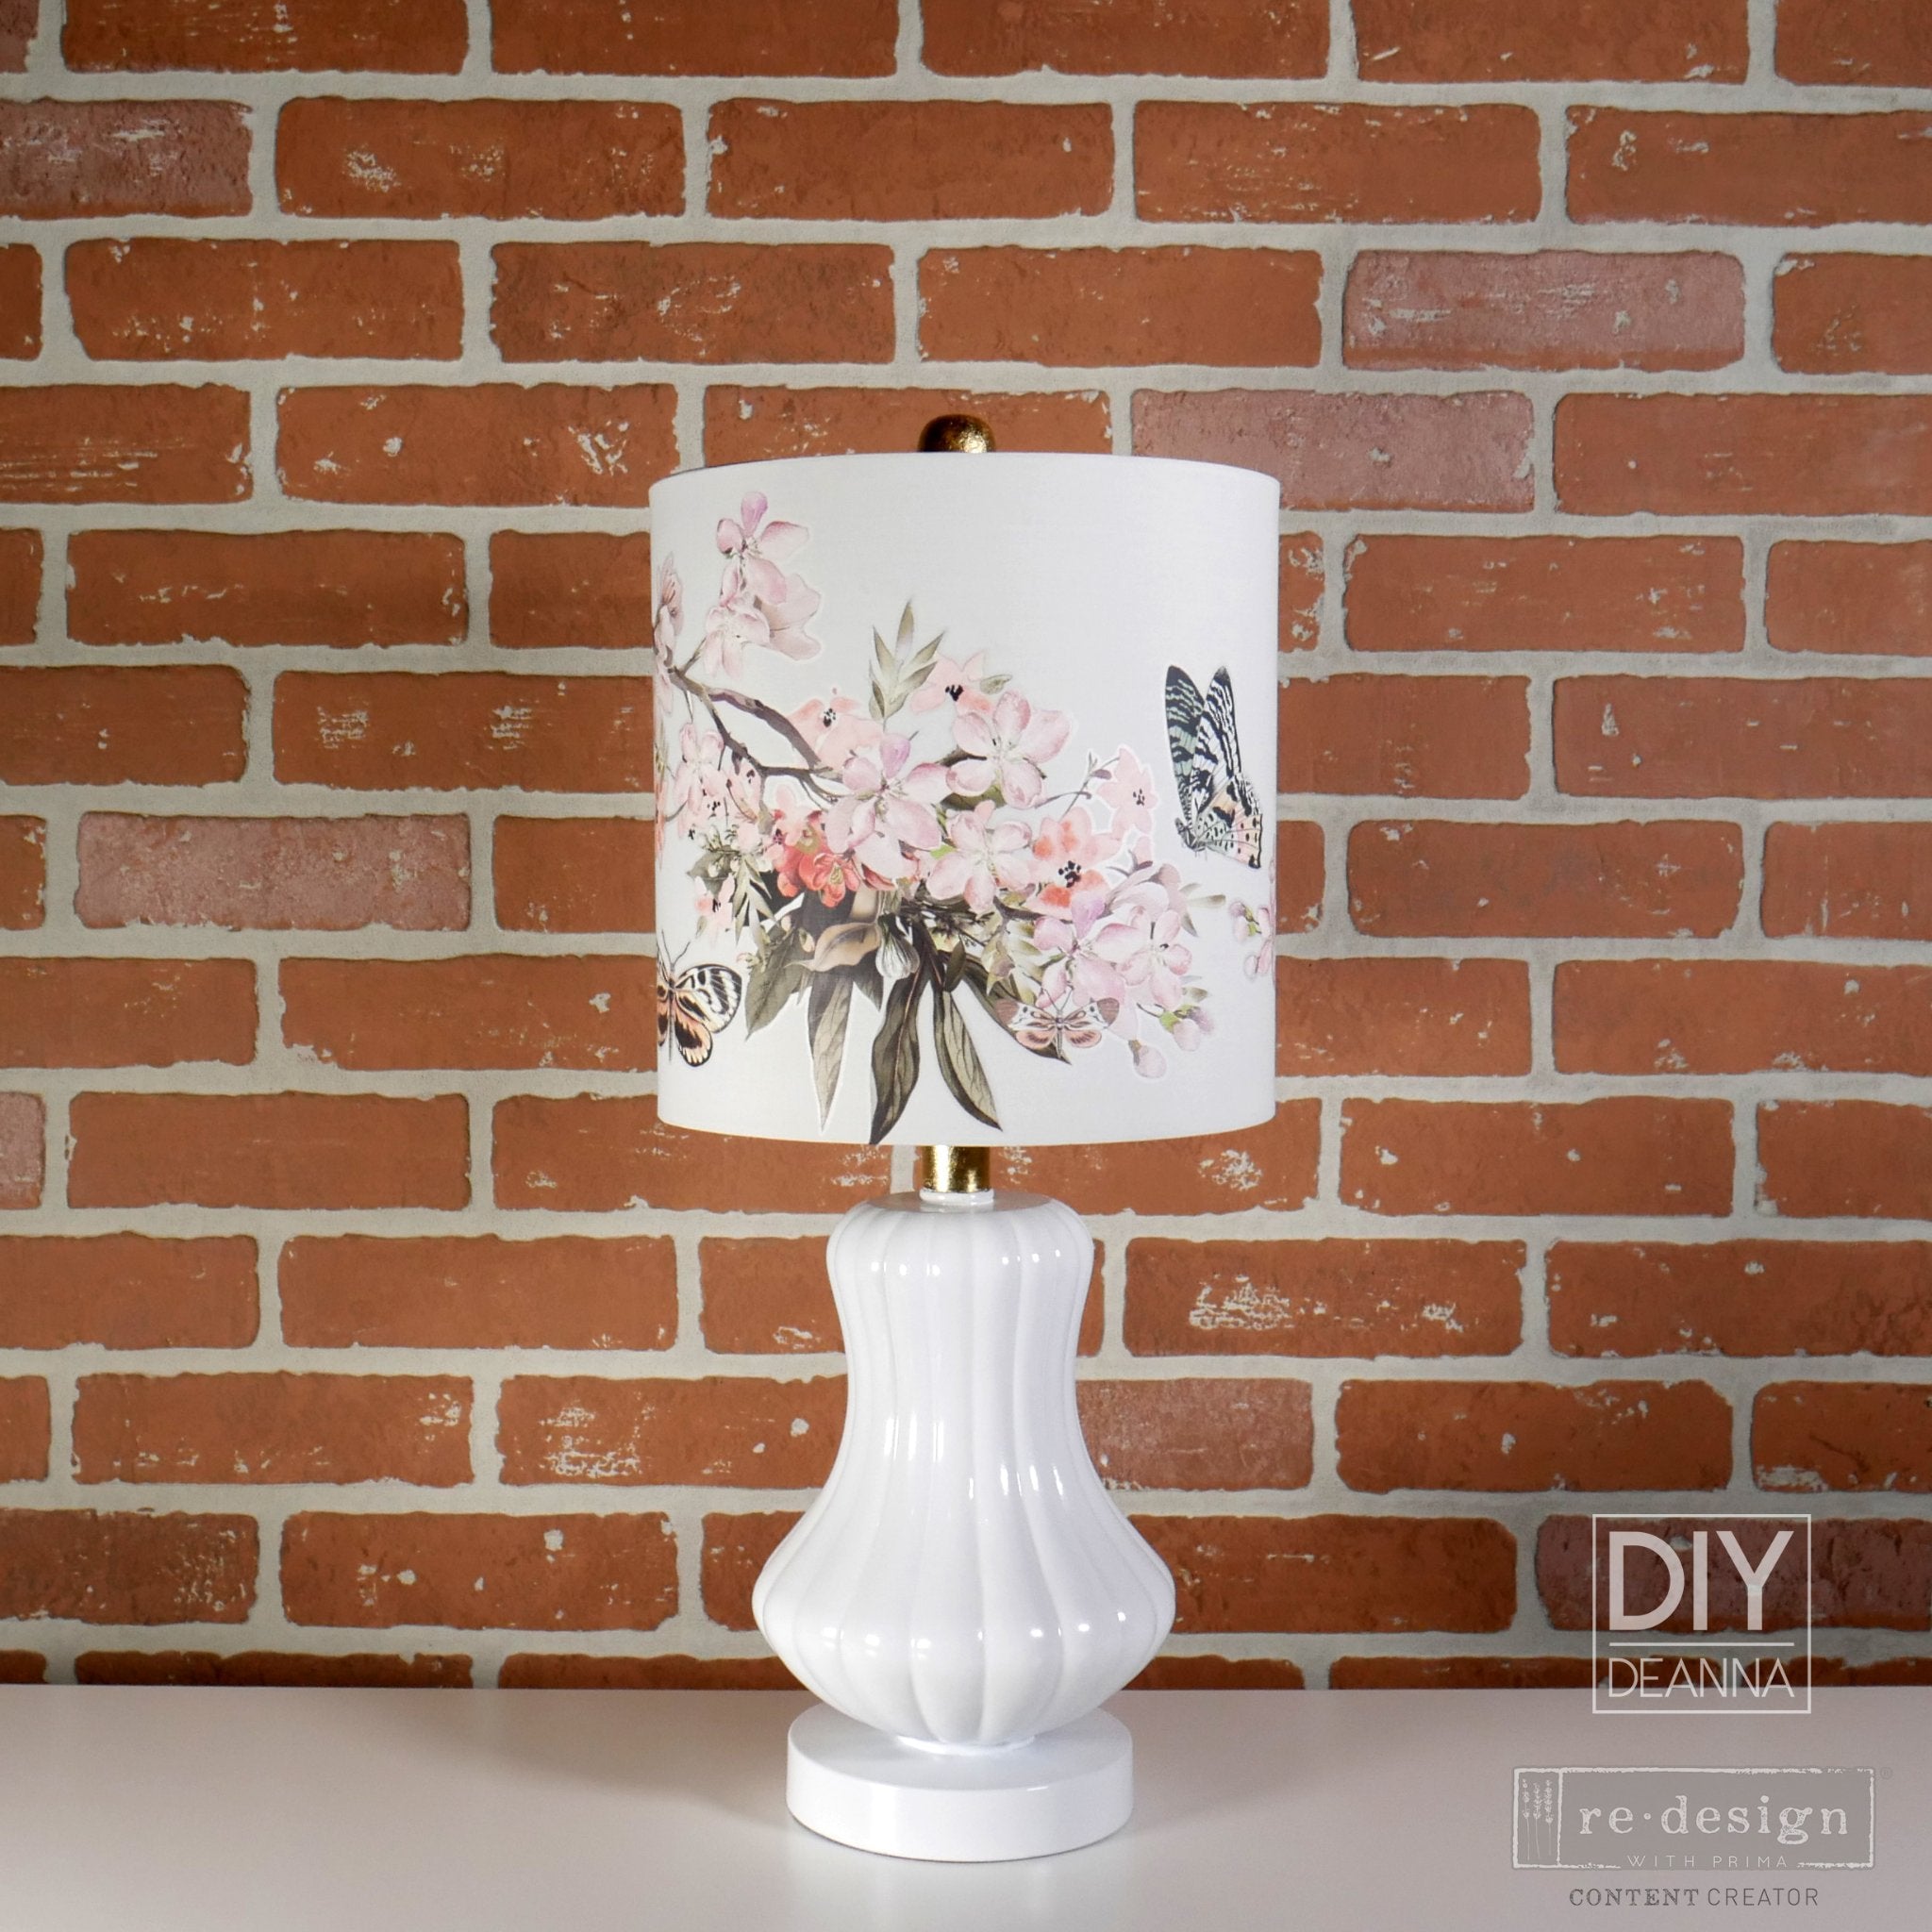 A white ceramic lamp refurbished by DIY Deanna is against a red brick wall backdrop and features ReDesign with Prima's Blossom Botanica on its white lamp shade.